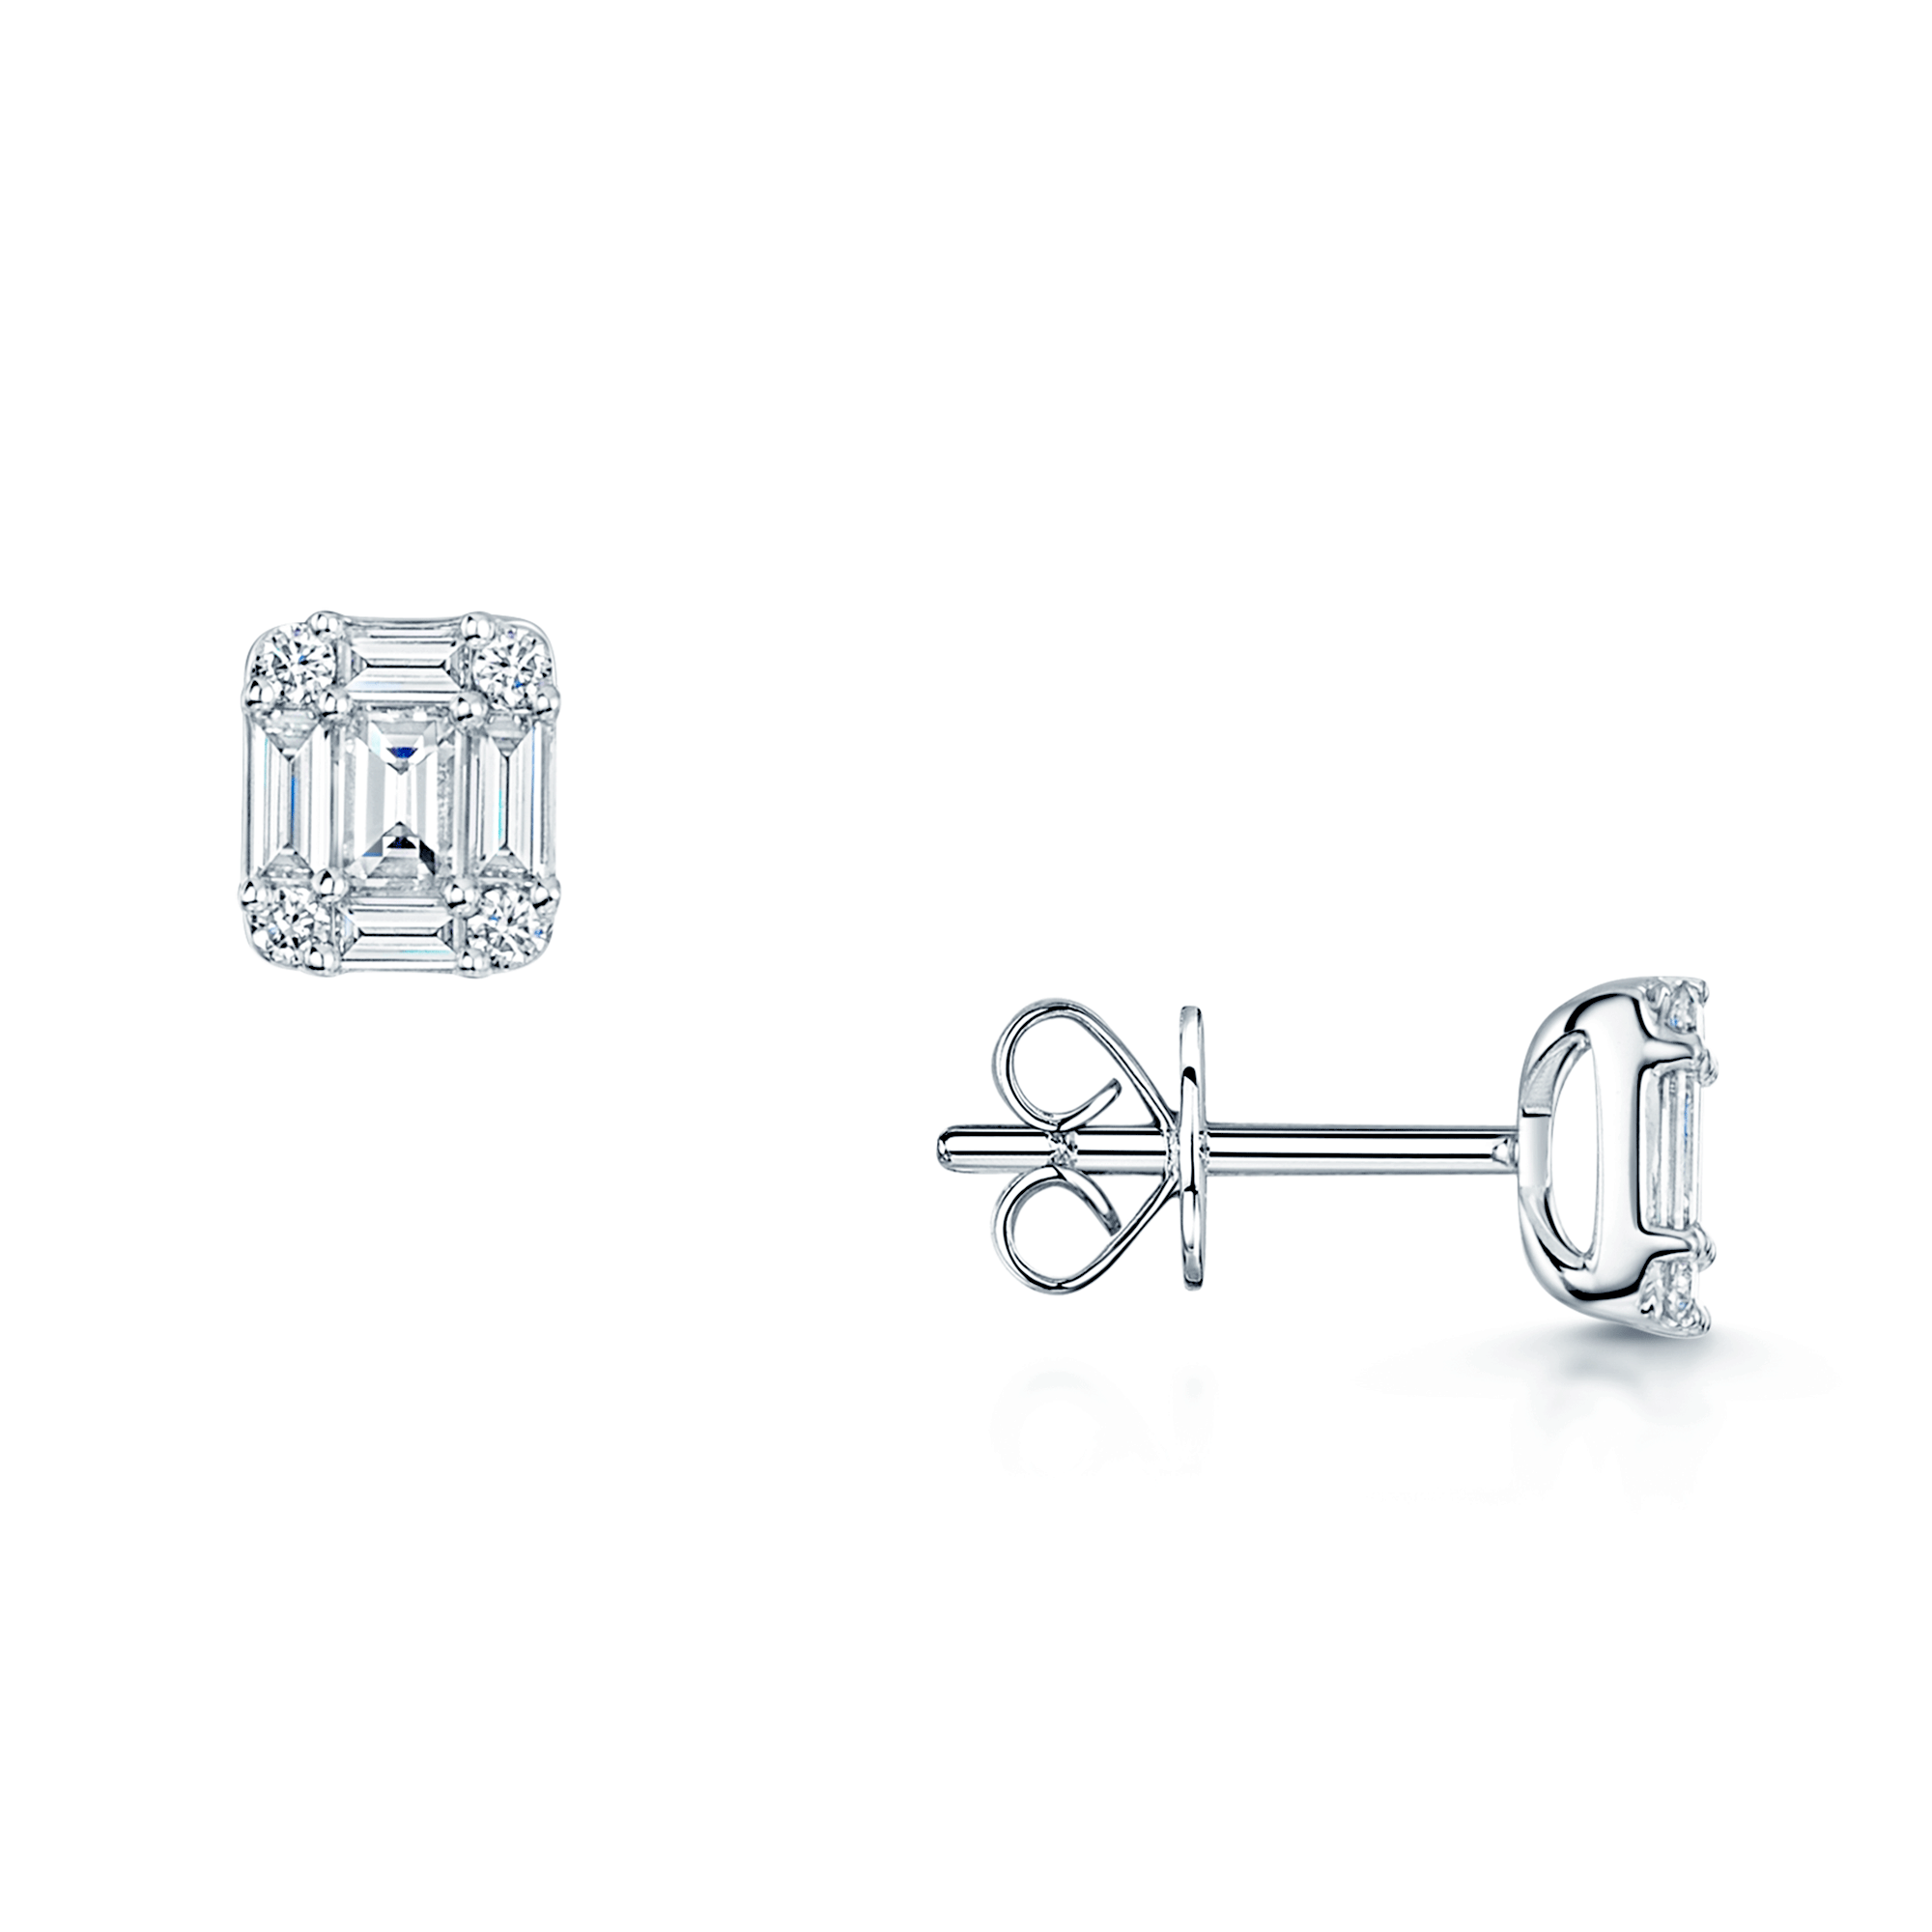 18ct White Gold Baguette And Round Brilliant Cut Diamond Stud Earrings